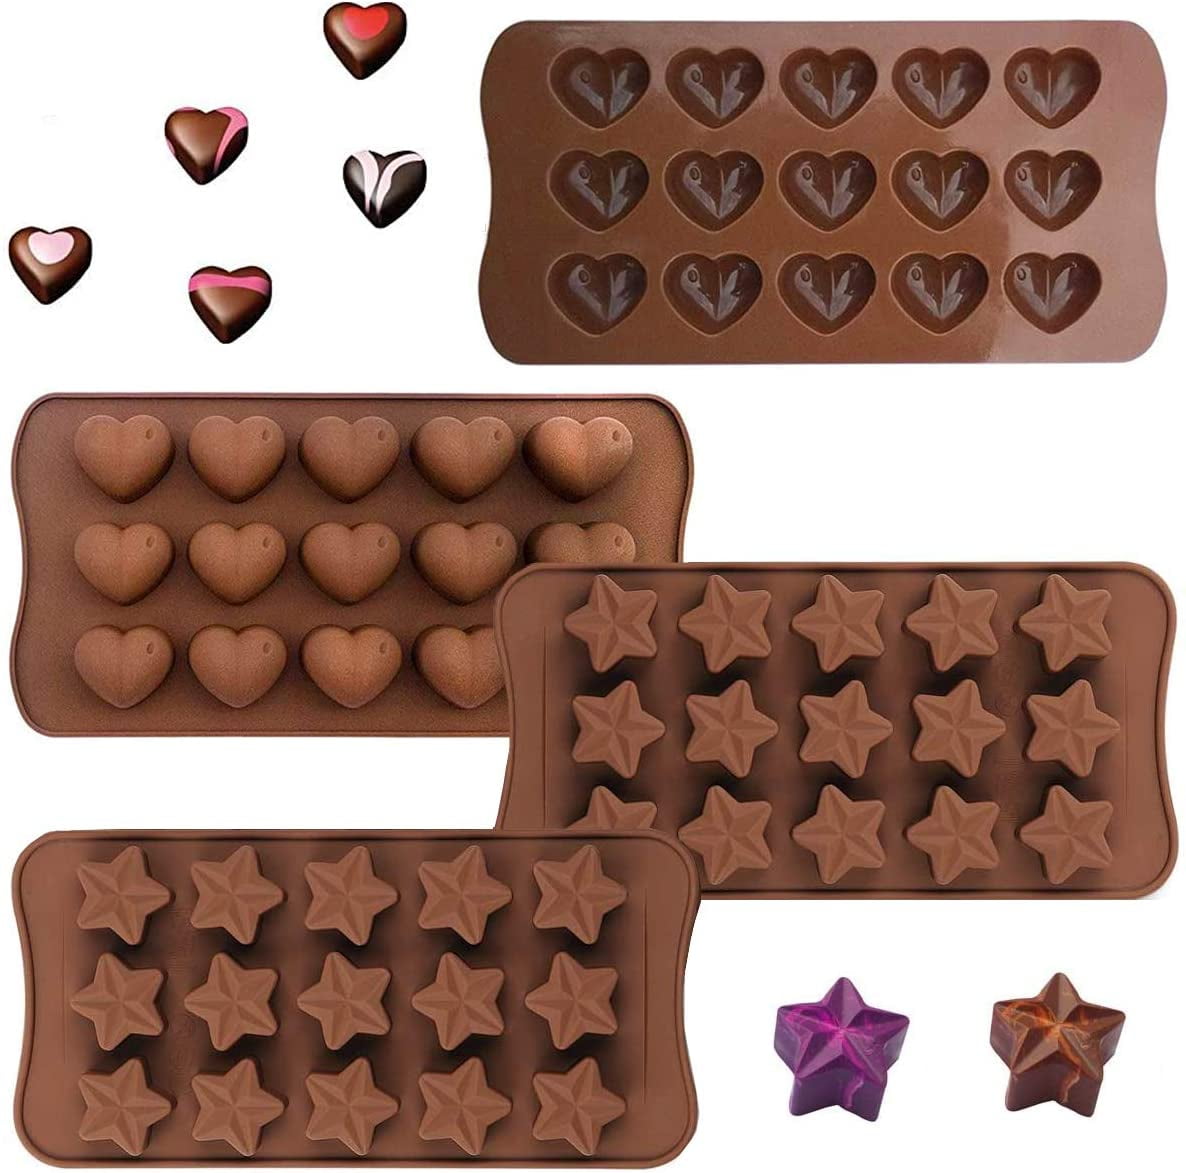 4 cell WOOD BARK Chocolate Bar Chocolatier Professional Silicone Artisan Mould